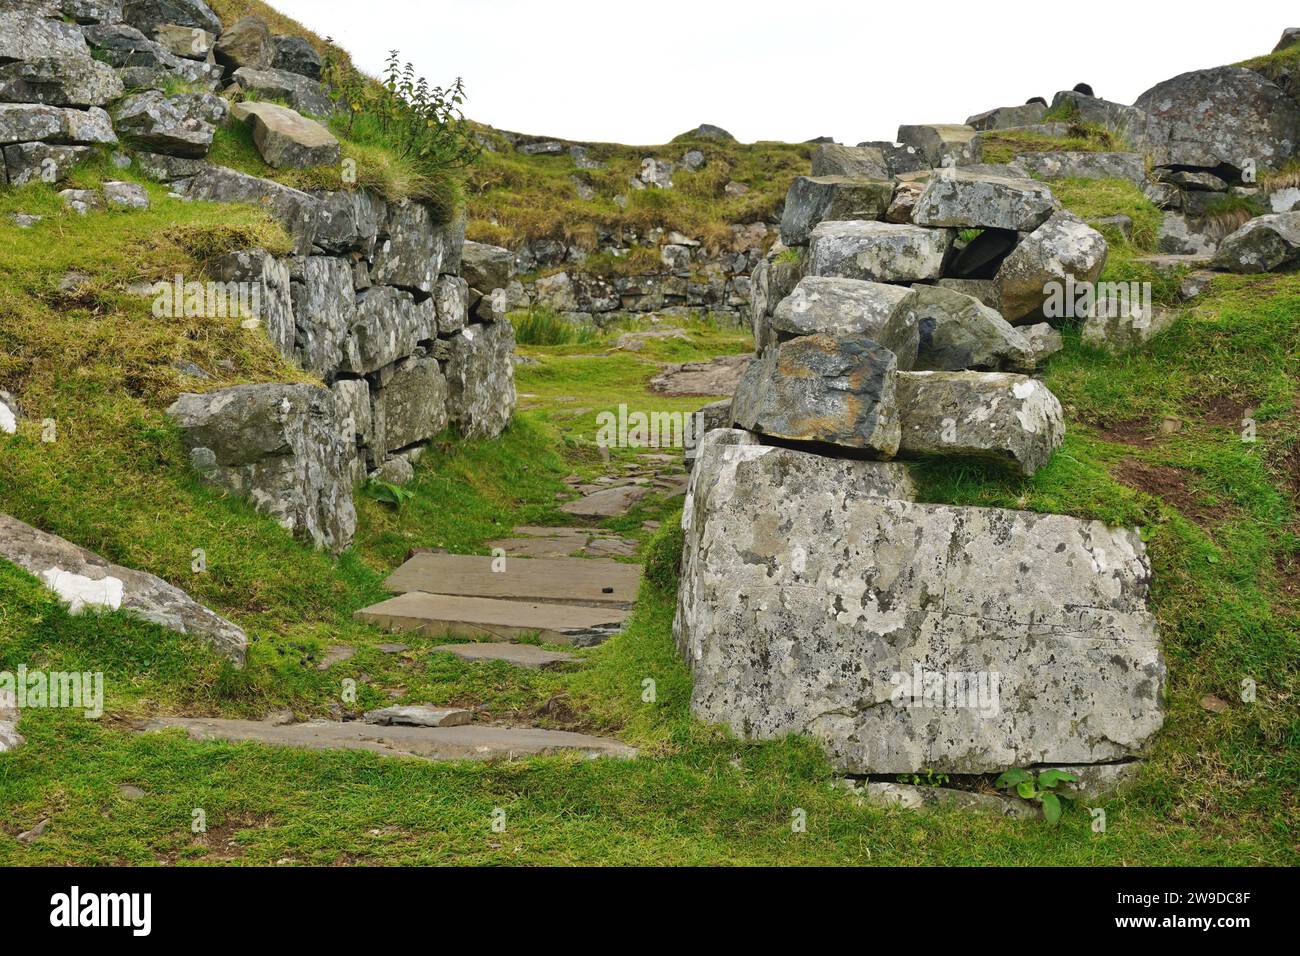 Ruins of Dun Beag Broch, an Iron-Age structure on the Isle of Skye. Found only in Scotland, a broch is a round stone tower built about 2000 years ago Stock Photo